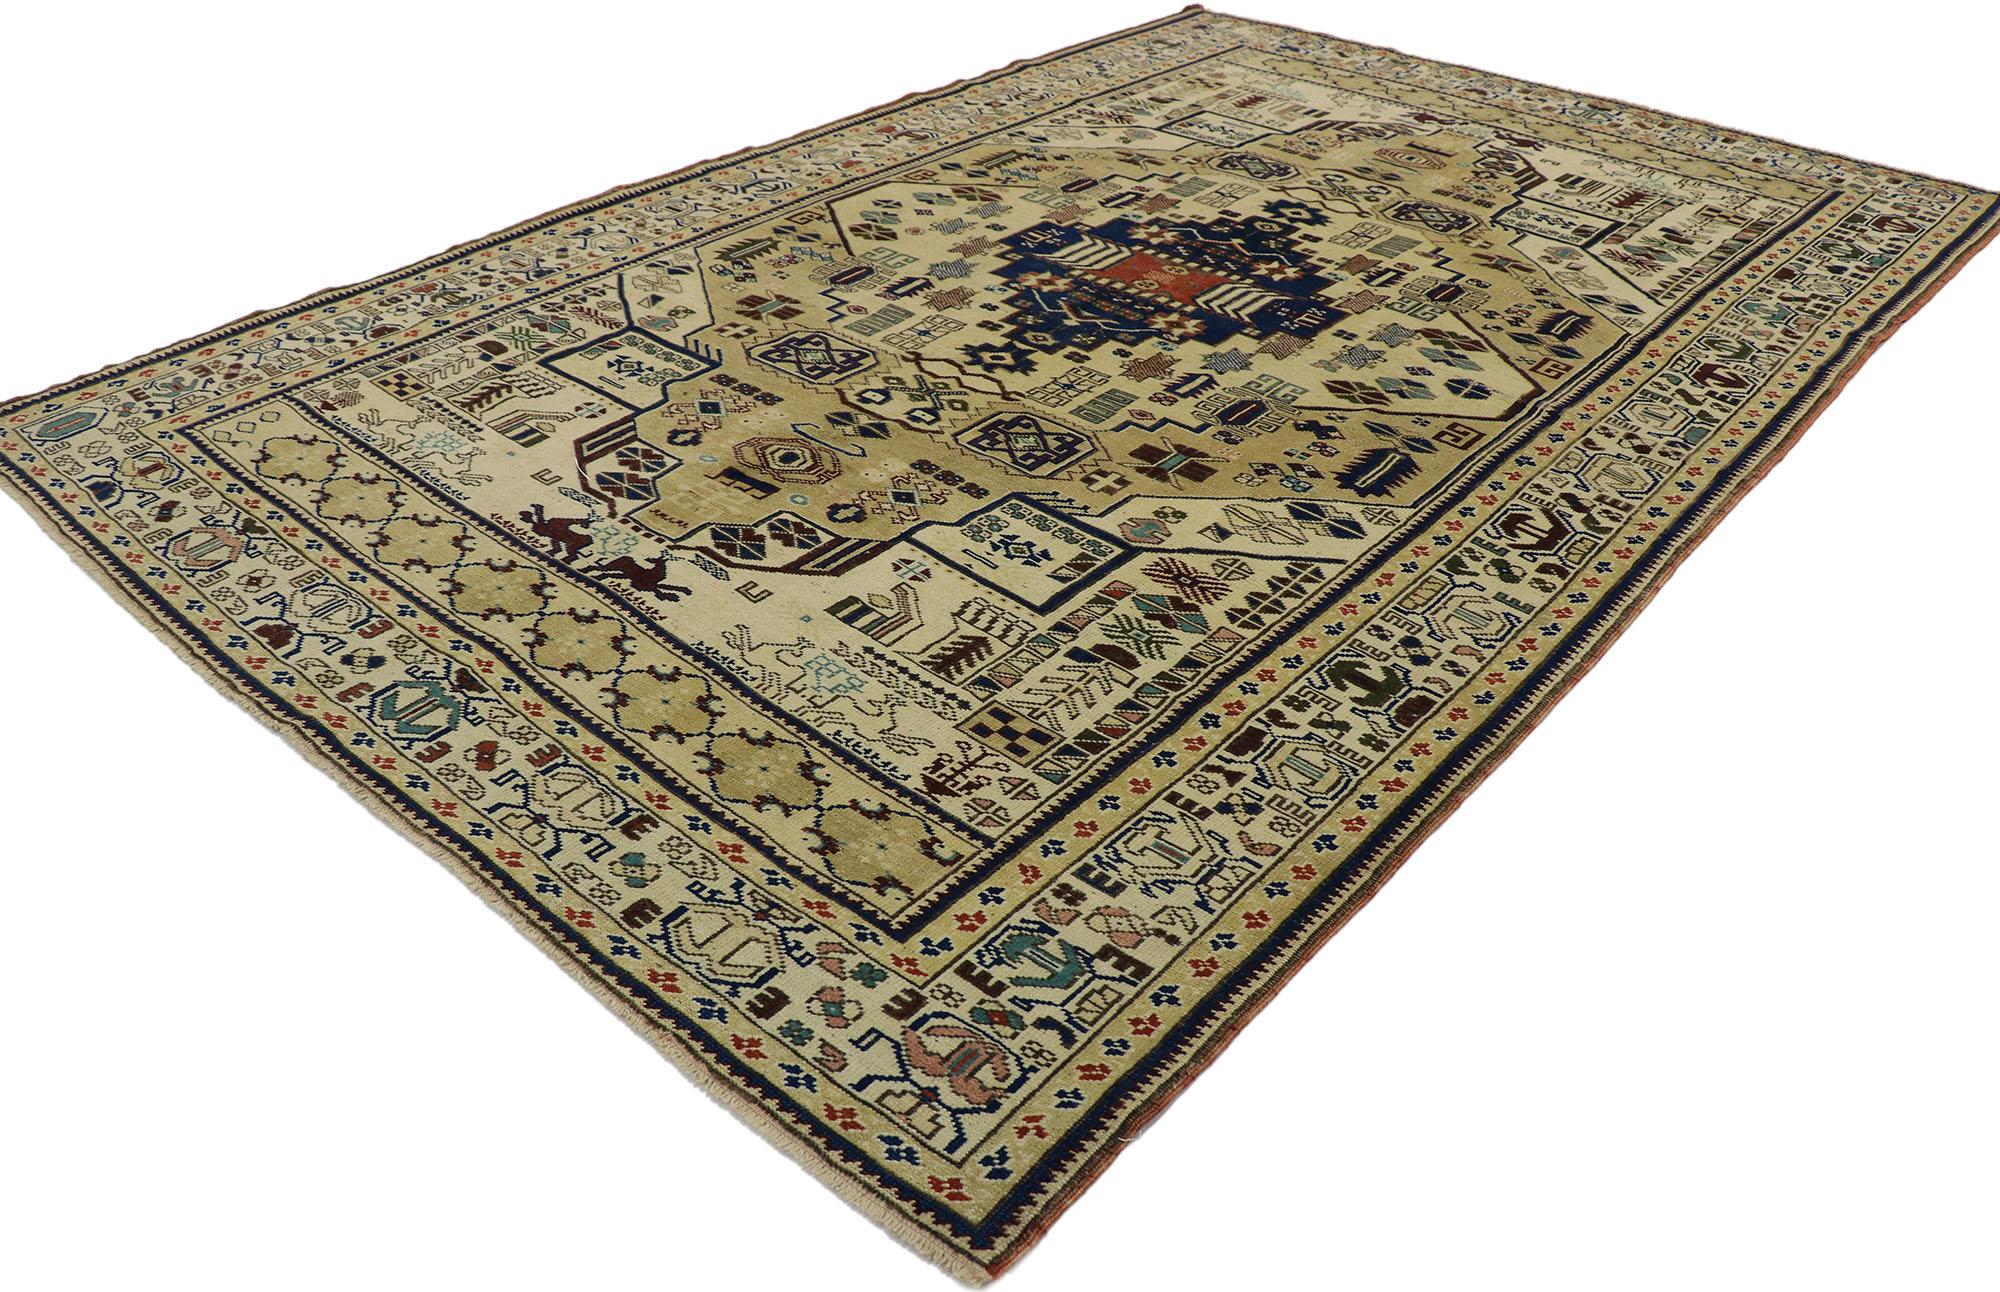 53225, vintage Turkish Oushak rug with Tribal style. Displaying a charming masculine appeal and the embodiment of tribal style, this hand knotted wool vintage Turkish Oushak rug is a captivating vision of woven beauty. The abrashed cut-out field